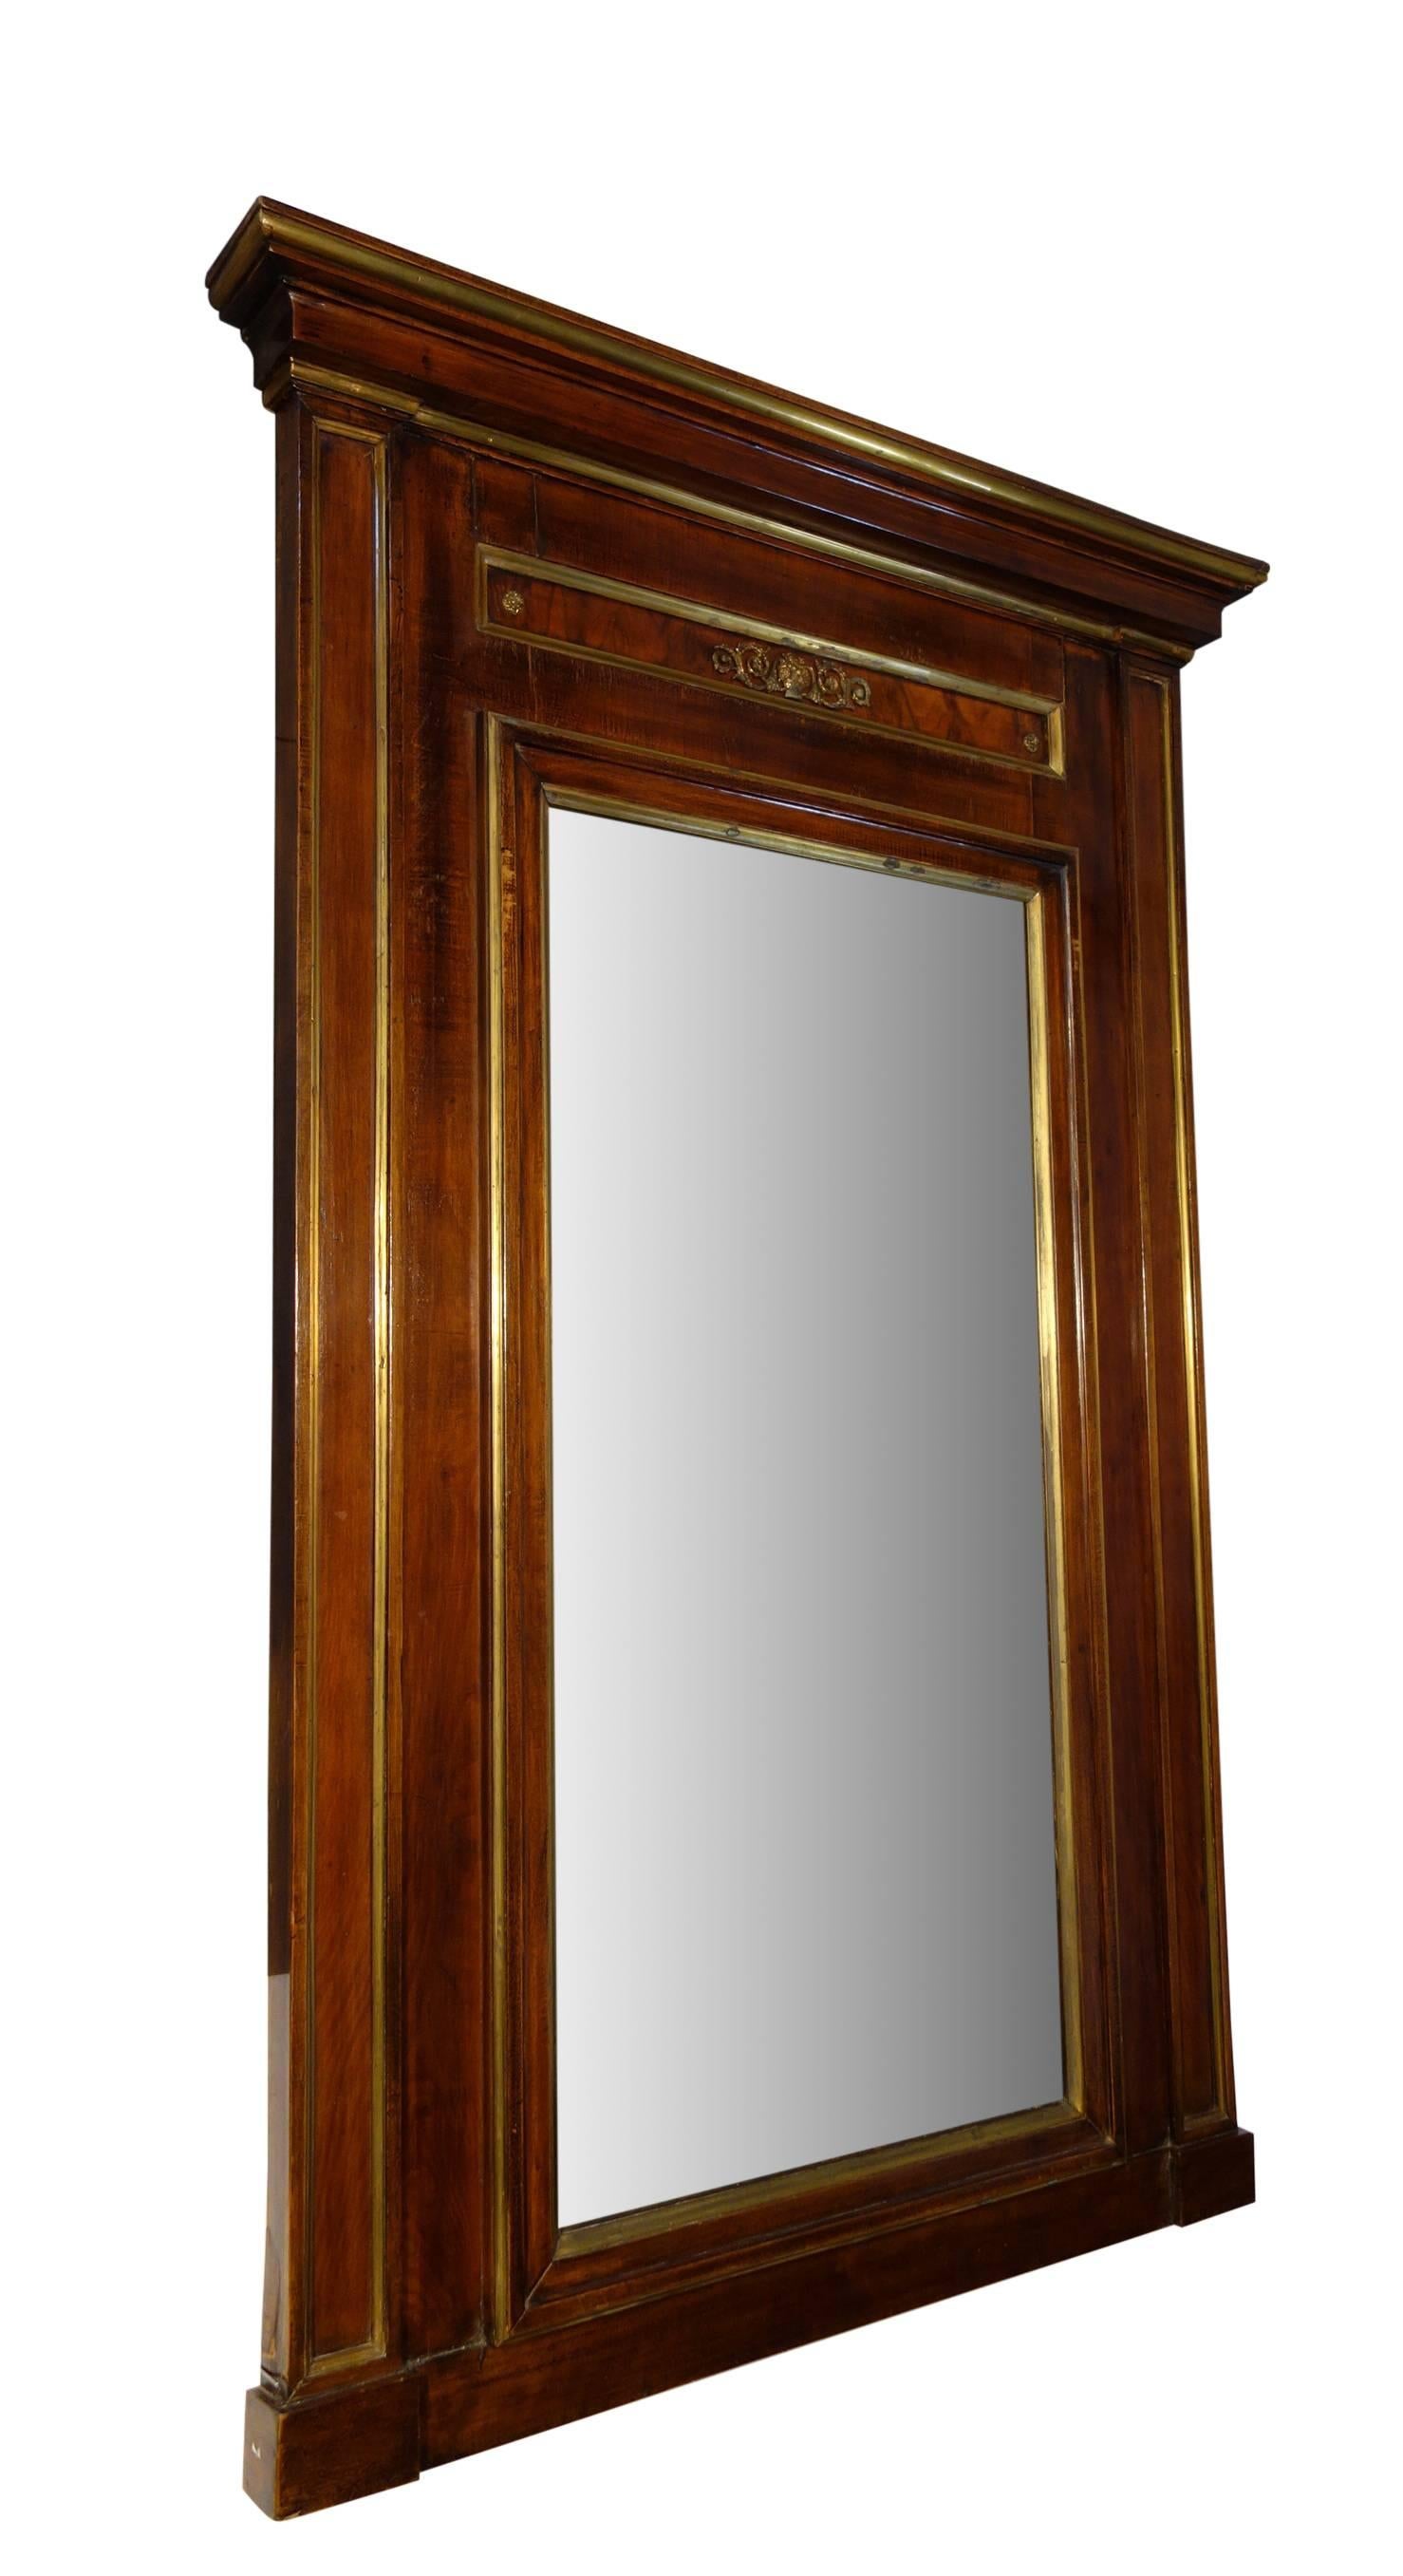 Italian Early 19th Century Empire Framed Mirror Walnut with Gold Detail Circa 1820 For Sale